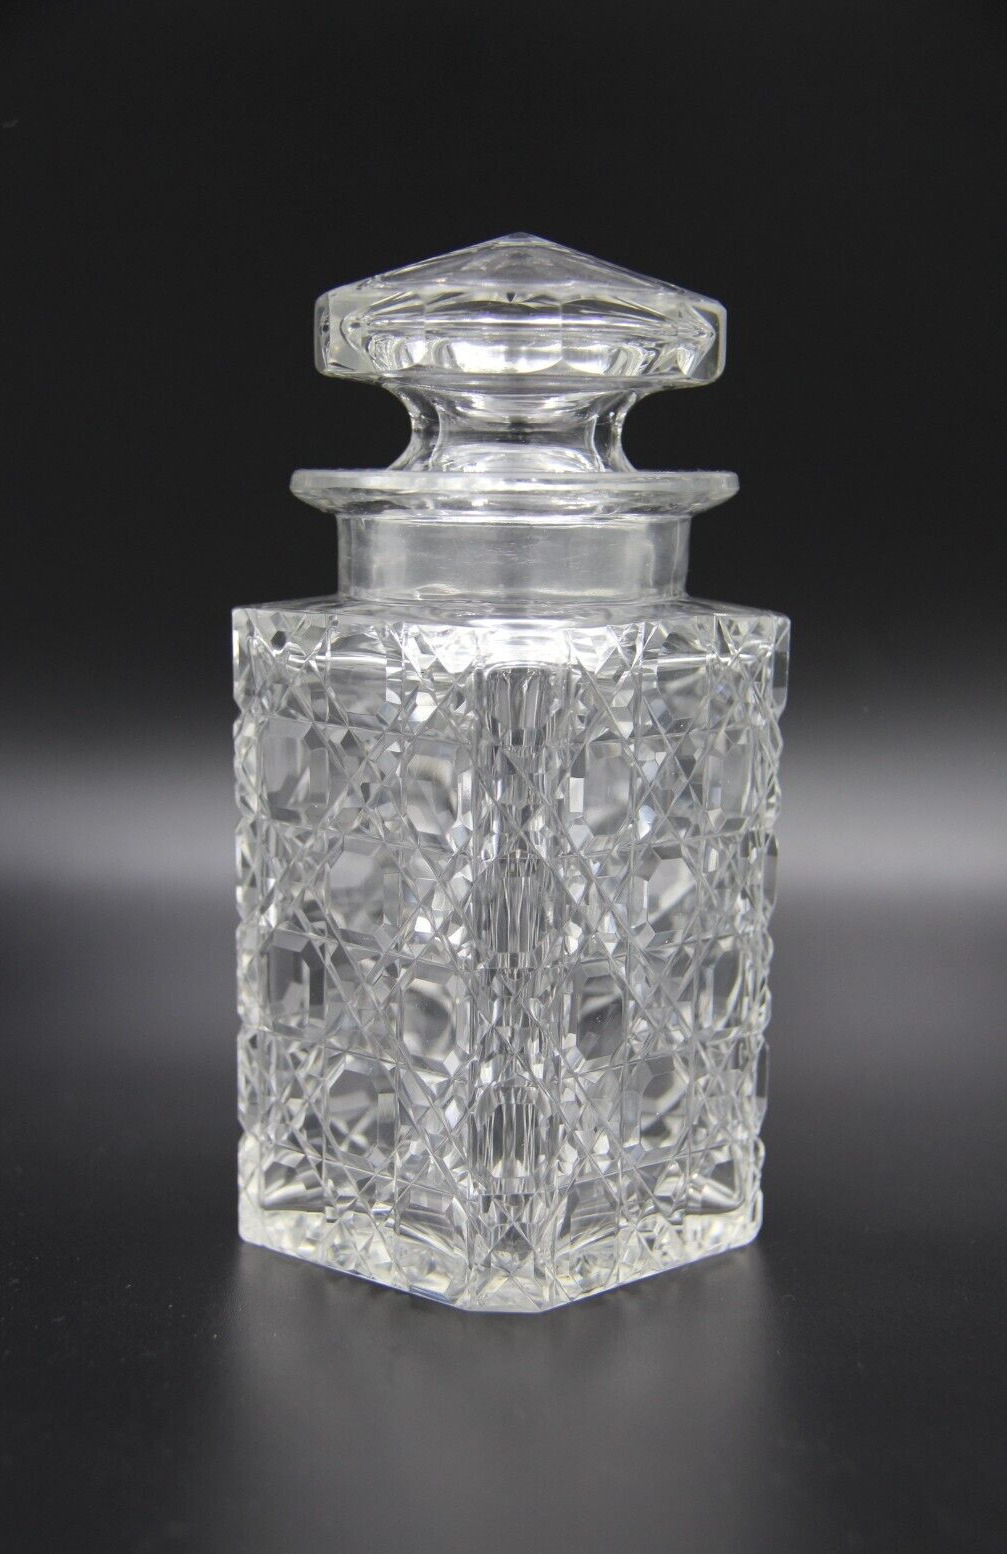 1900s Antique Hobnail Cut Glass Apothecary Jar with Faceted Stopper